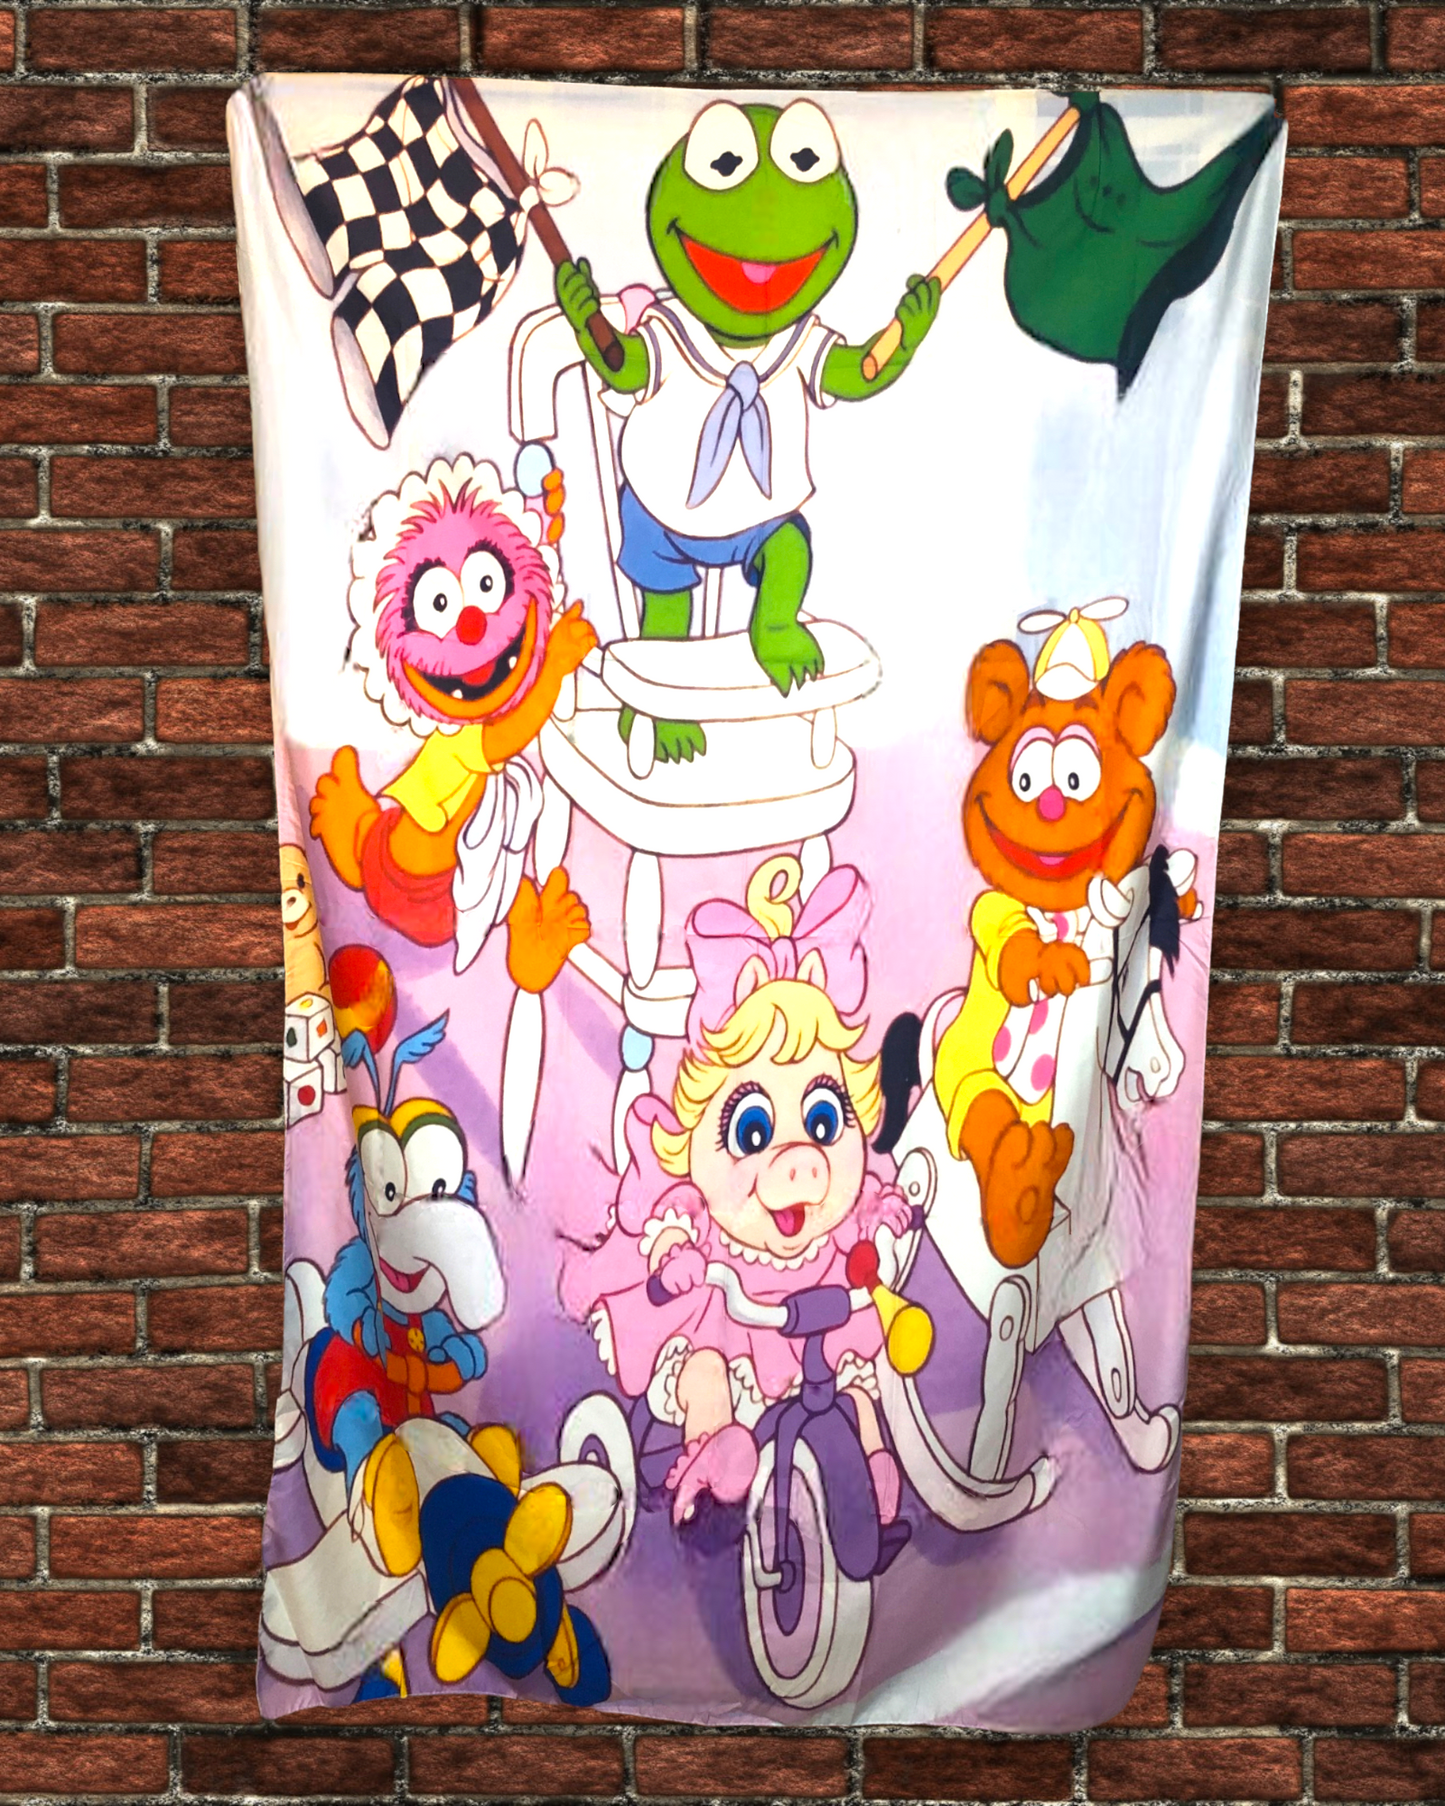 36" x 60" Muppet Babies Tapestry Wall Hanging Décor